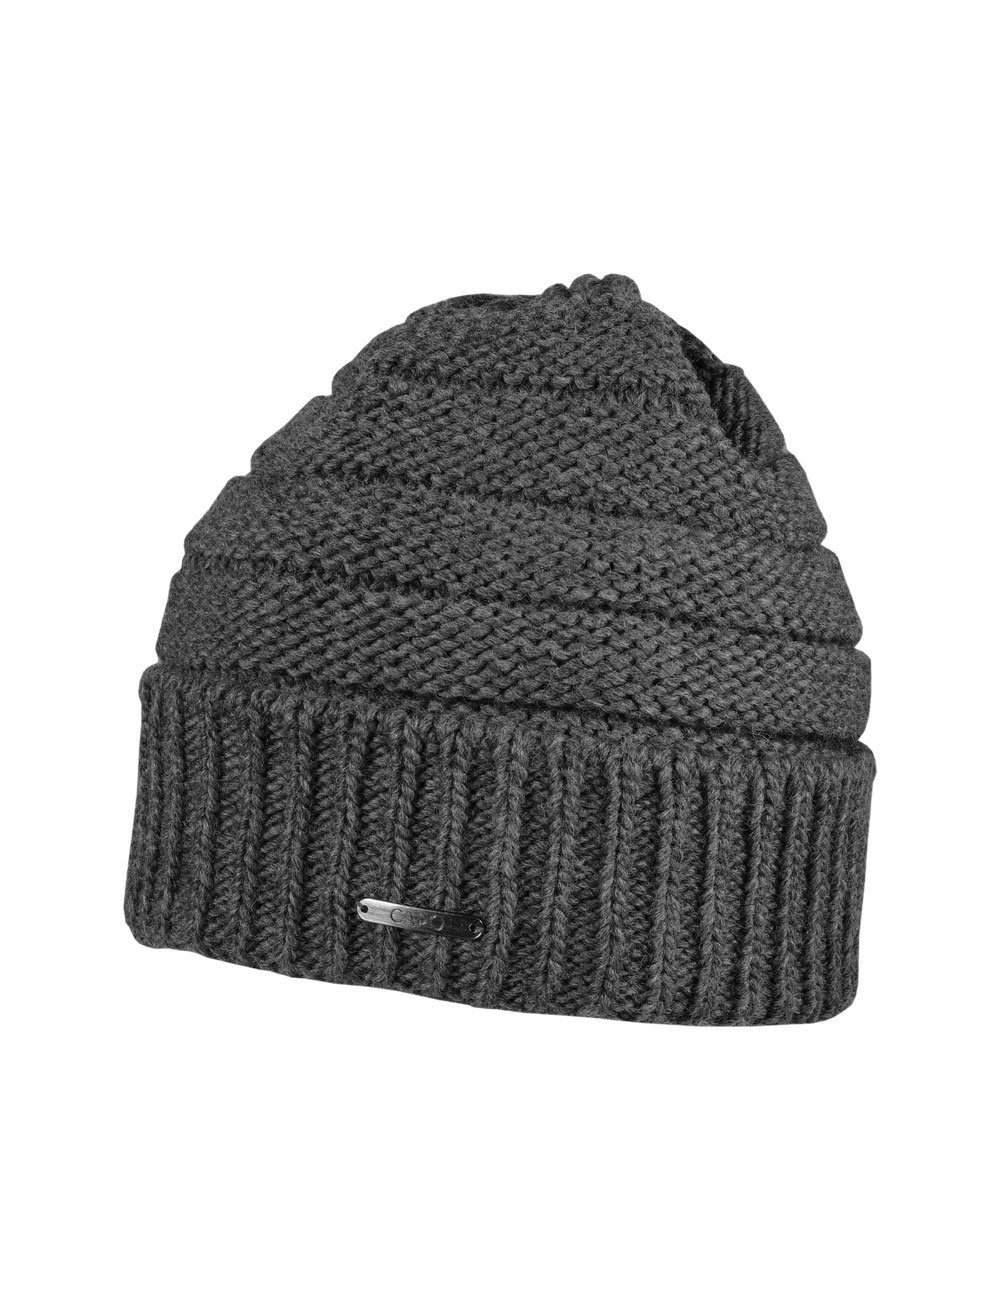 CAPO Strickmütze CAPO-PIPER CAP in knitted fleece Made cap, short Germany up, turn